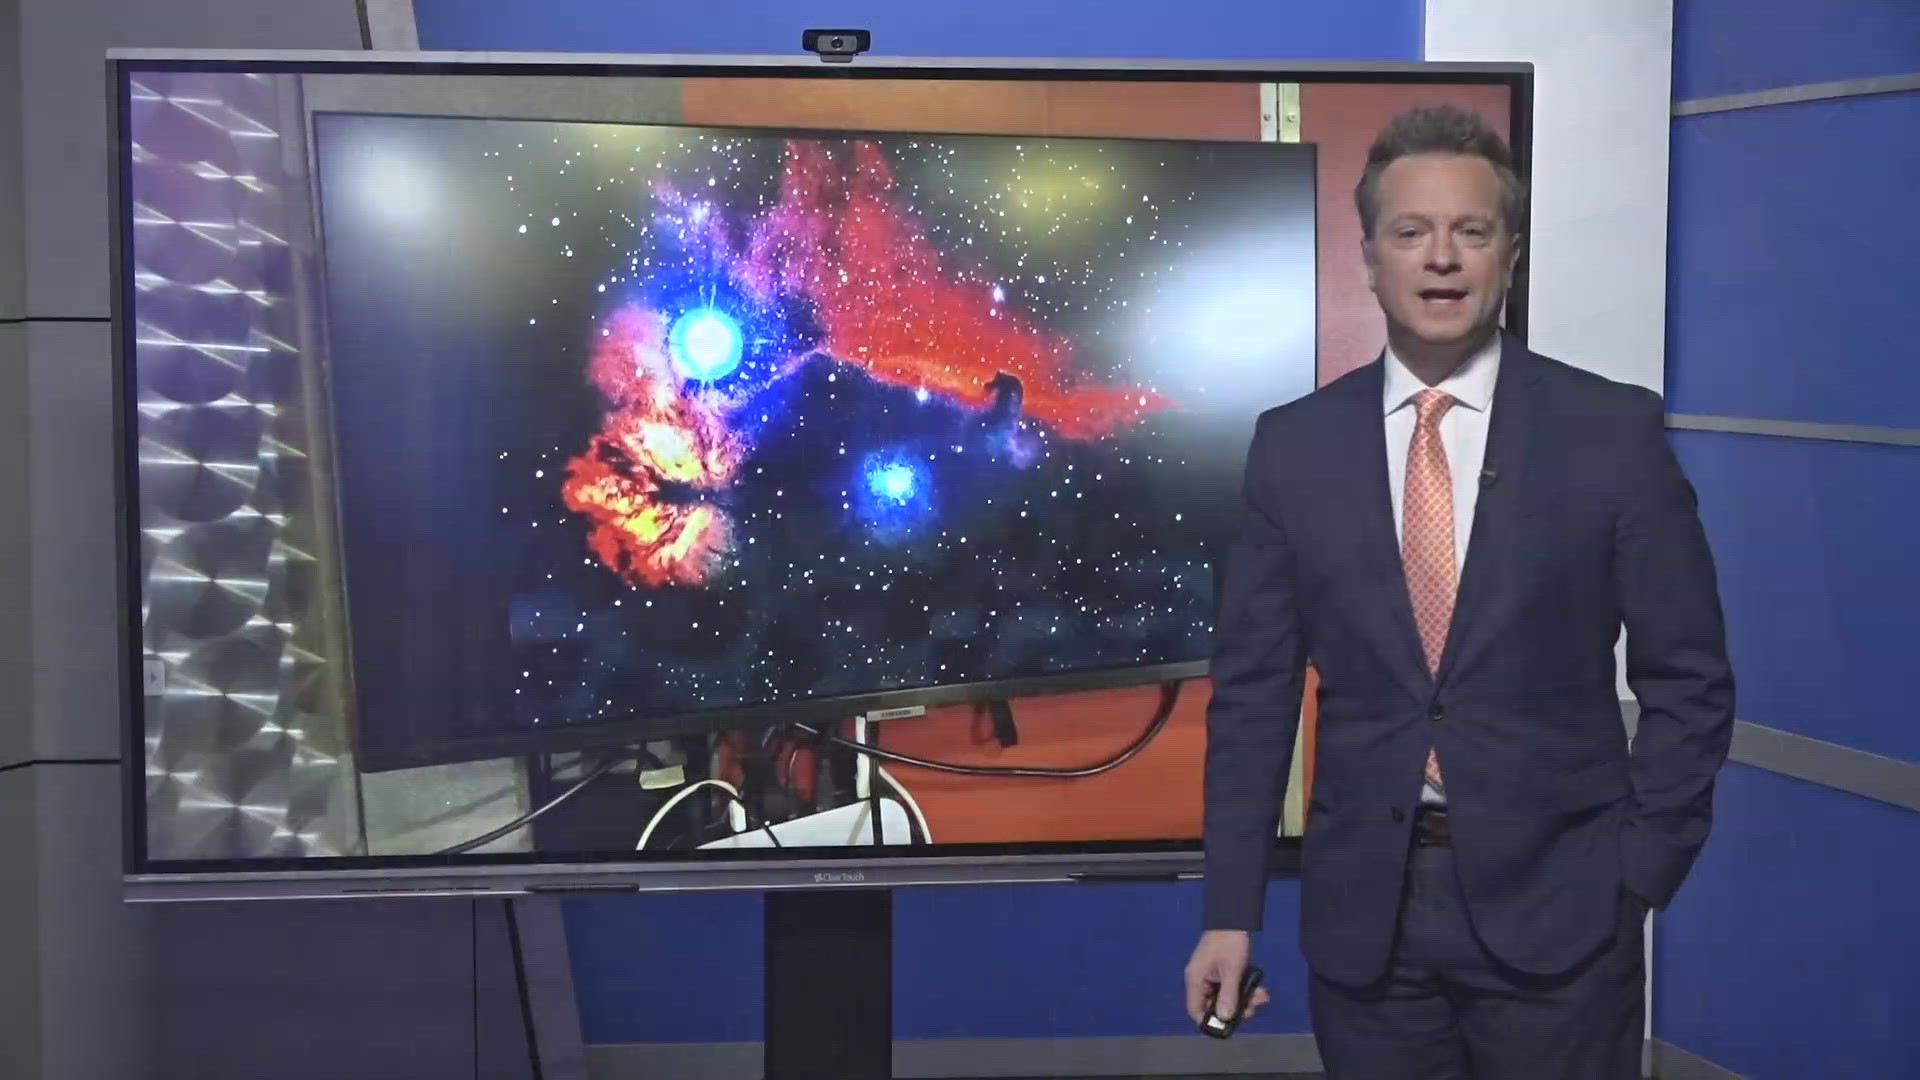 WFMY News 2’s Christian Morgan walks viewers through a new solar system exhibit, giving them an outer world experience.